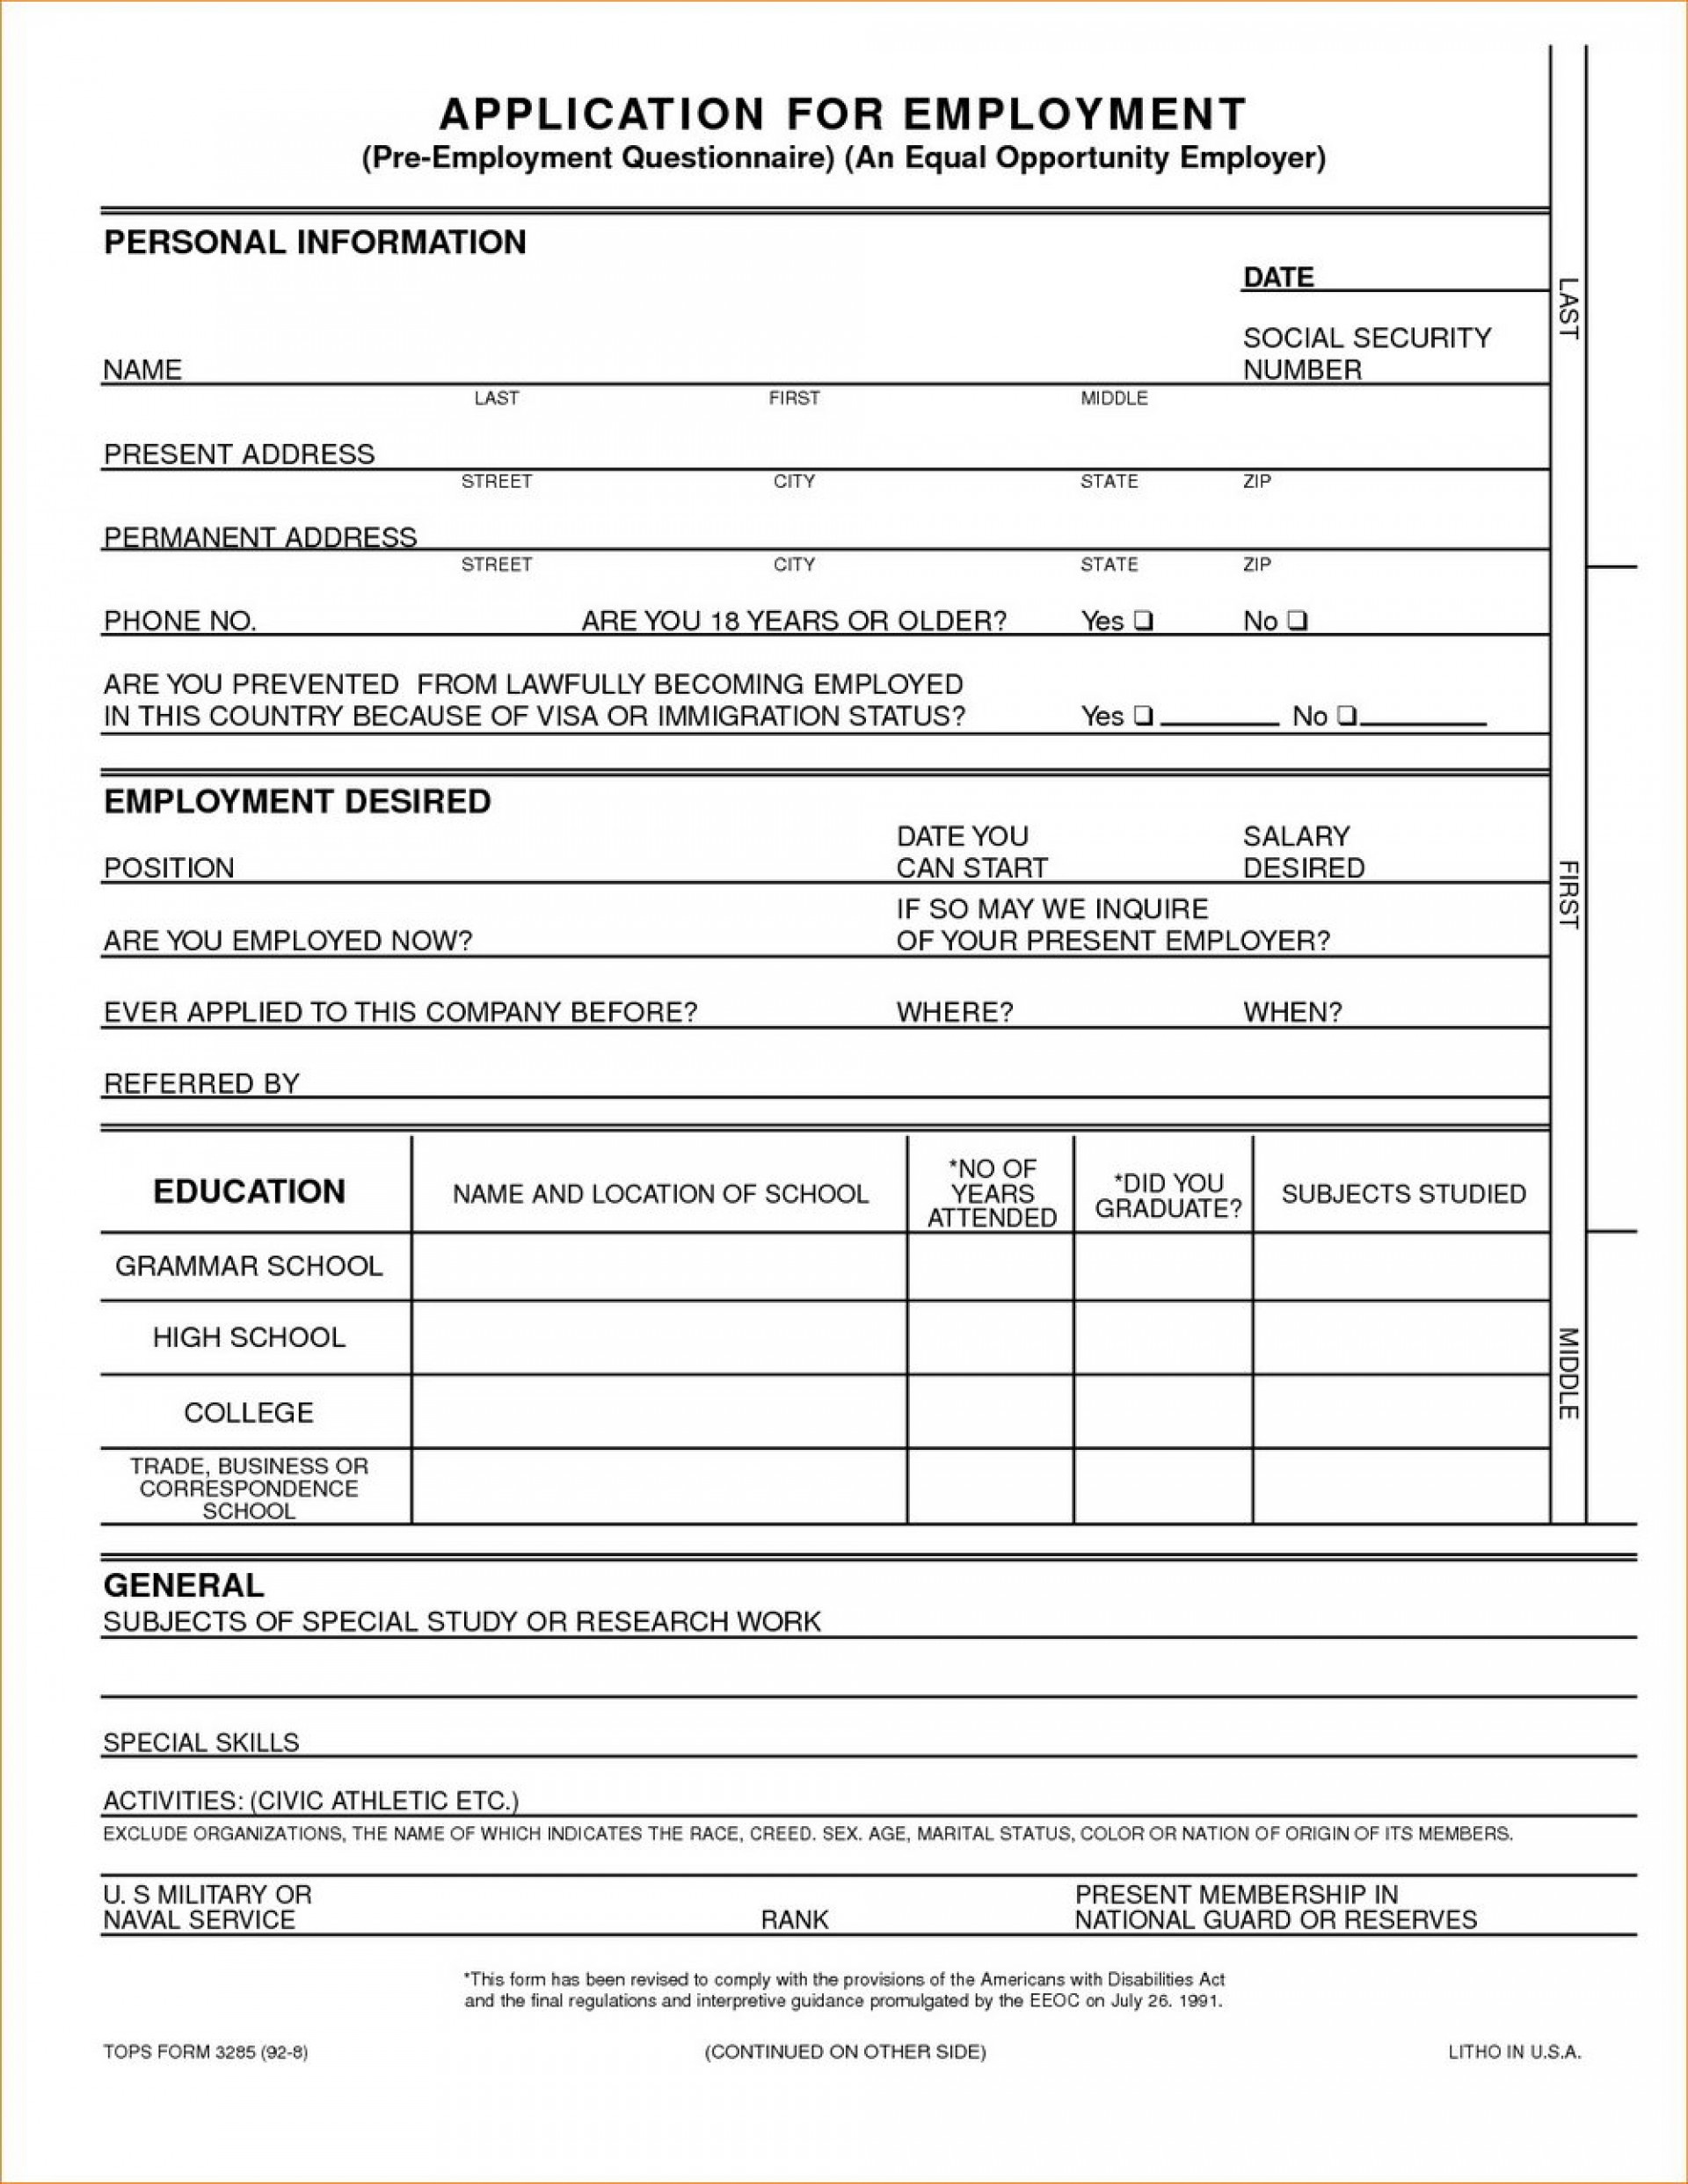 023 General Application For Employment Templatewriting Is Easy - Free Printable General Application For Employment